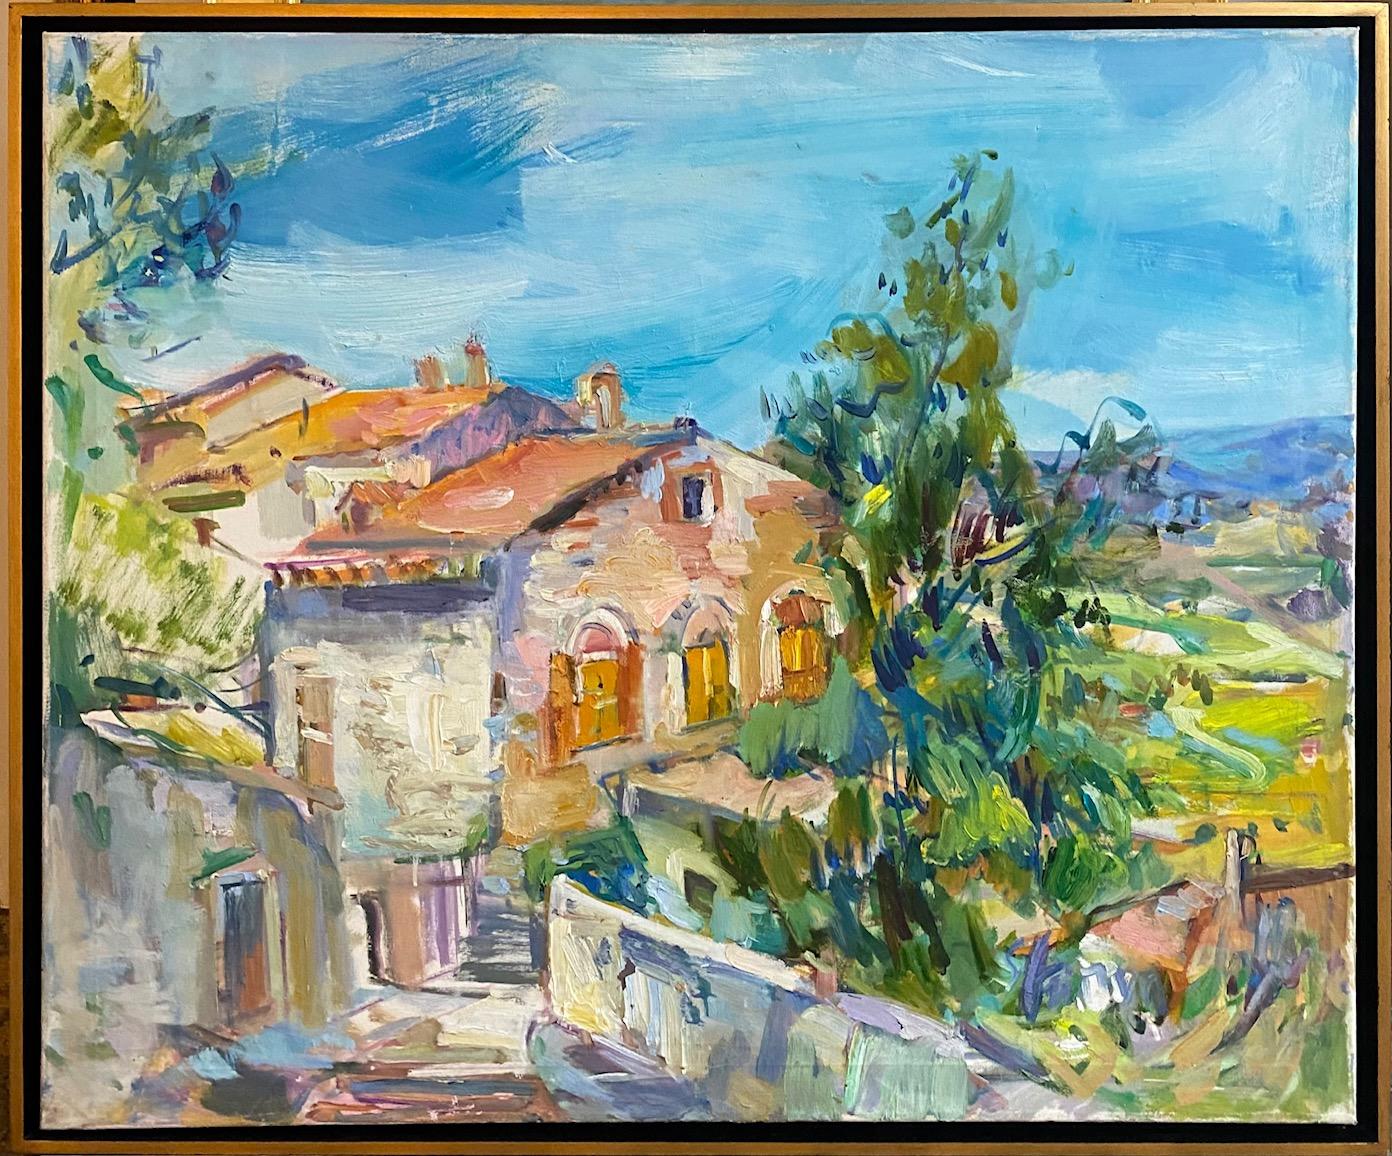 Sonia Grineva Abstract Painting - Todi, Umbria, original 30x36 abstract expressionist Italian landscape